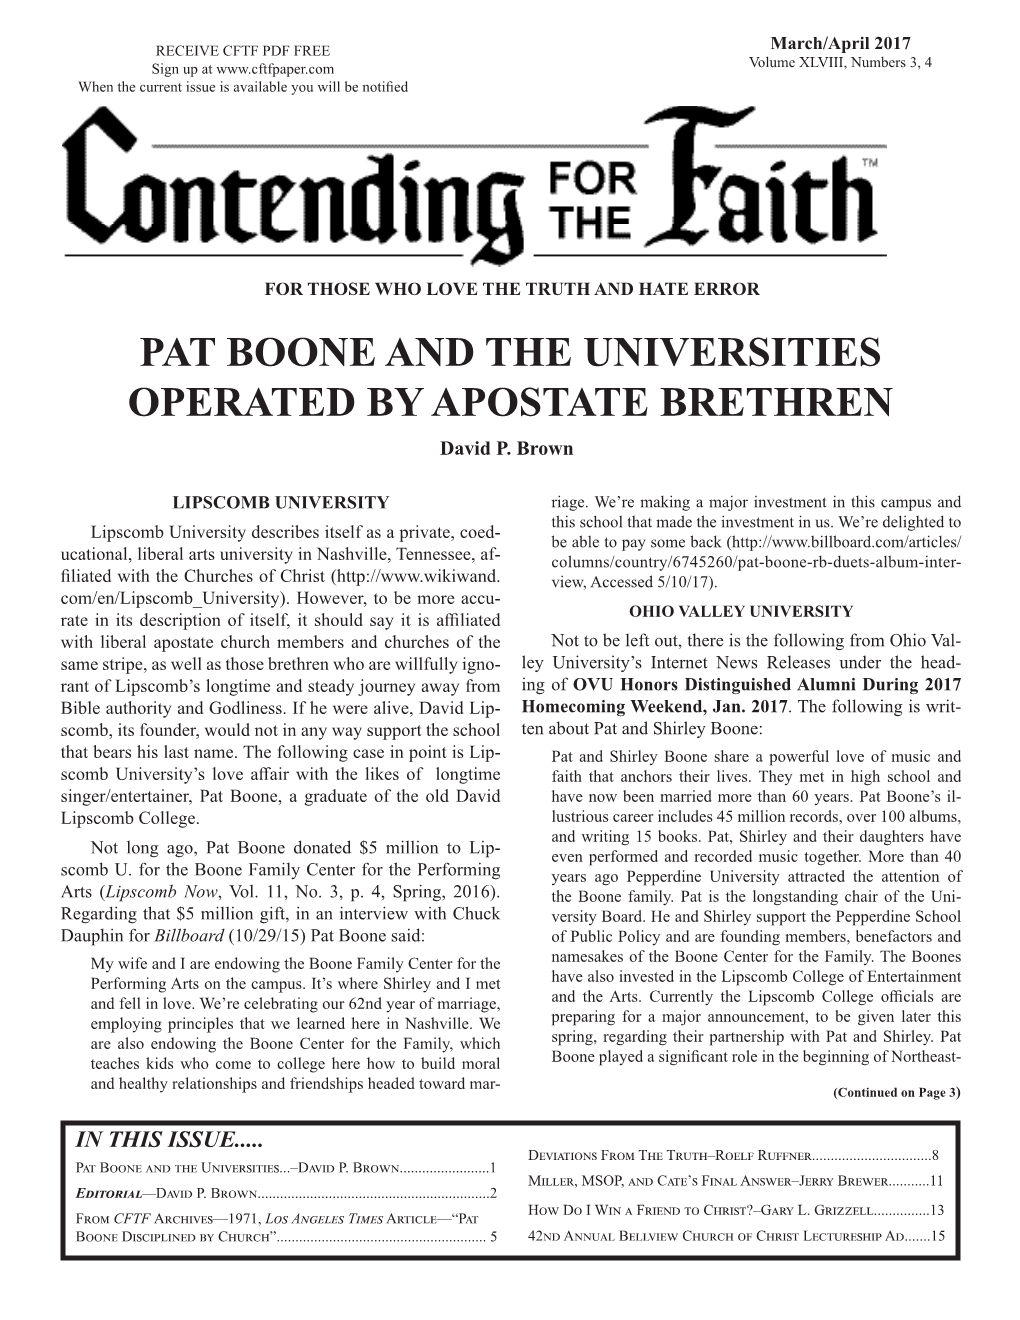 PAT BOONE and the UNIVERSITIES OPERATED by APOSTATE BRETHREN David P